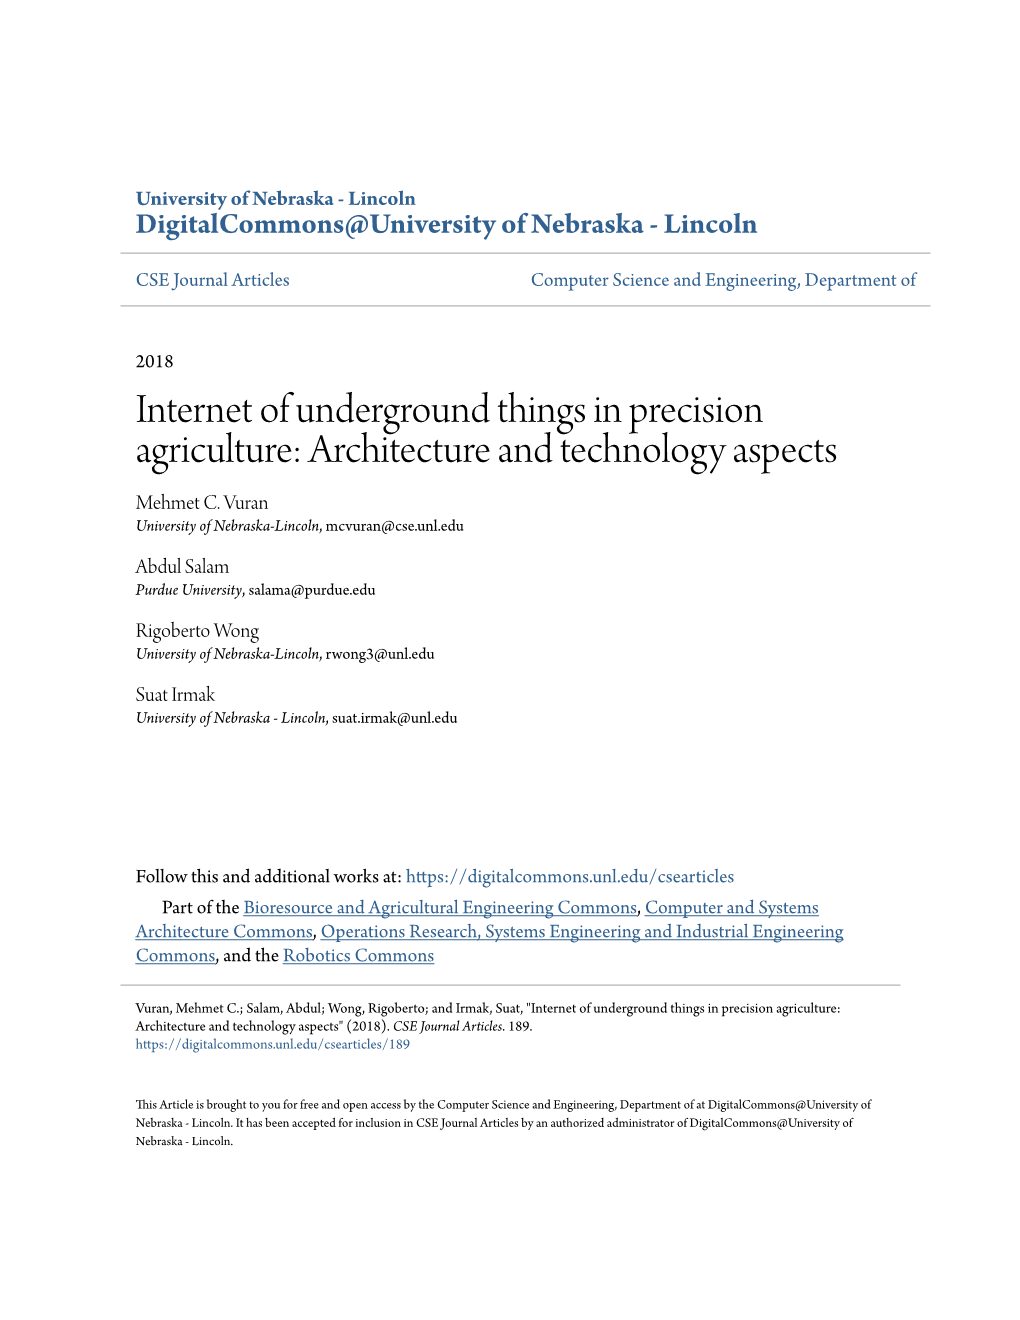 Internet of Underground Things in Precision Agriculture: Architecture and Technology Aspects Mehmet C